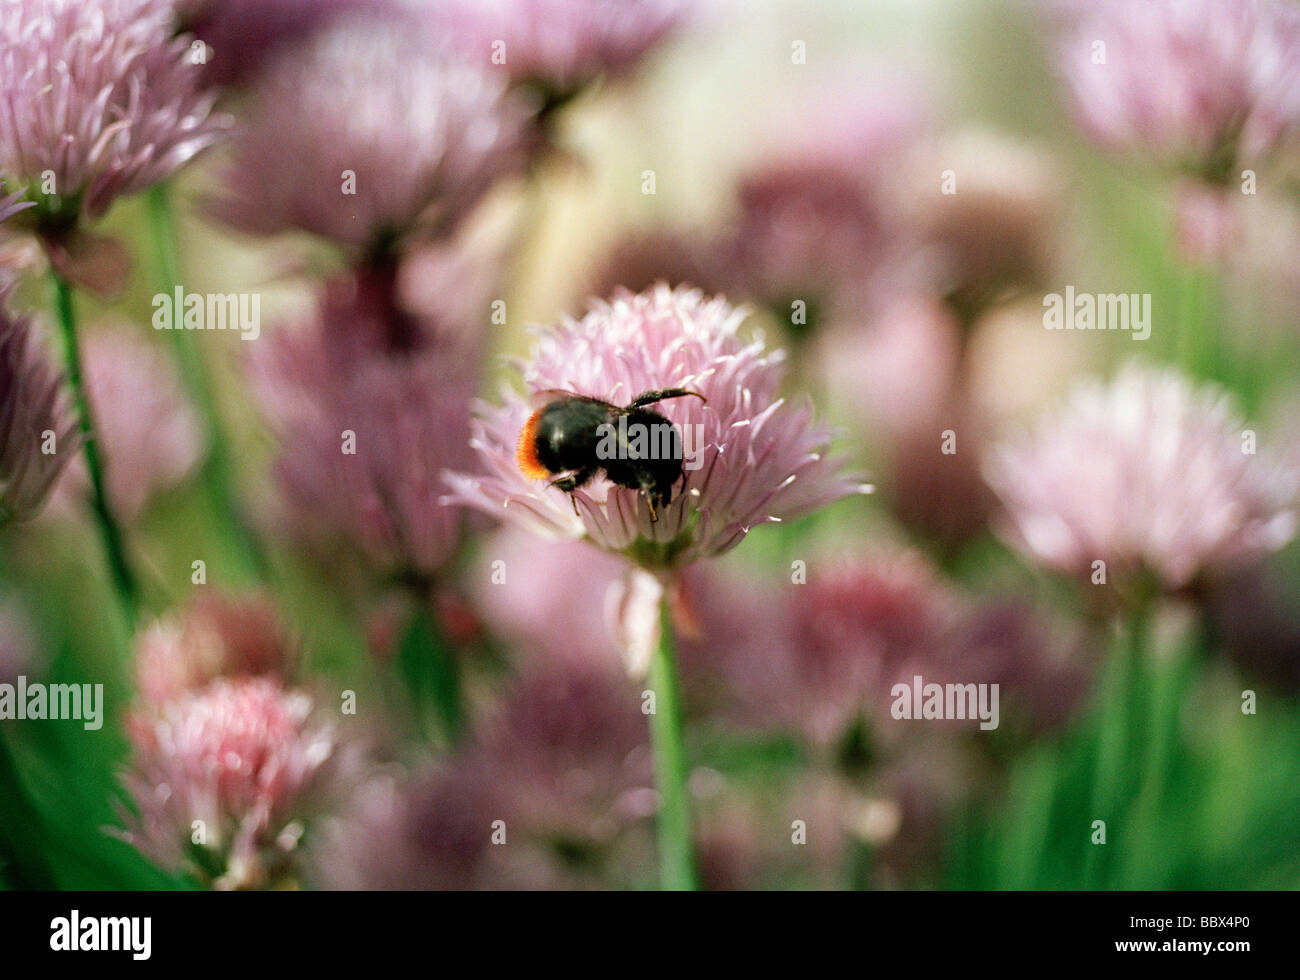 A bumble-bee on a flower in a garden Sweden. Stock Photo